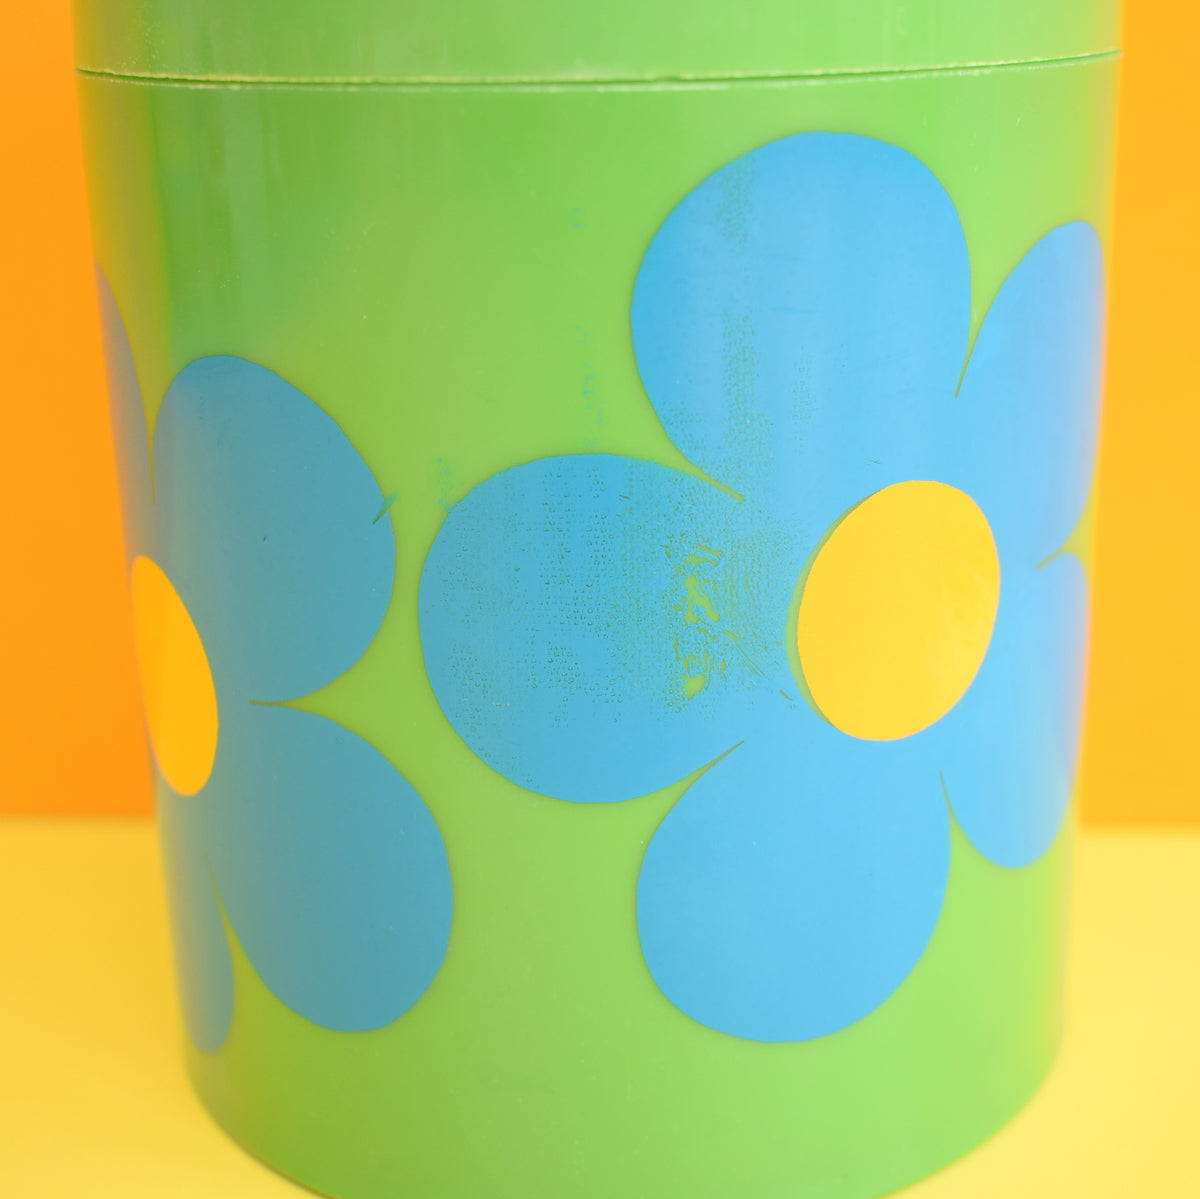 Vintage 1970s Laurids Lonborg Flower Power Container - Green